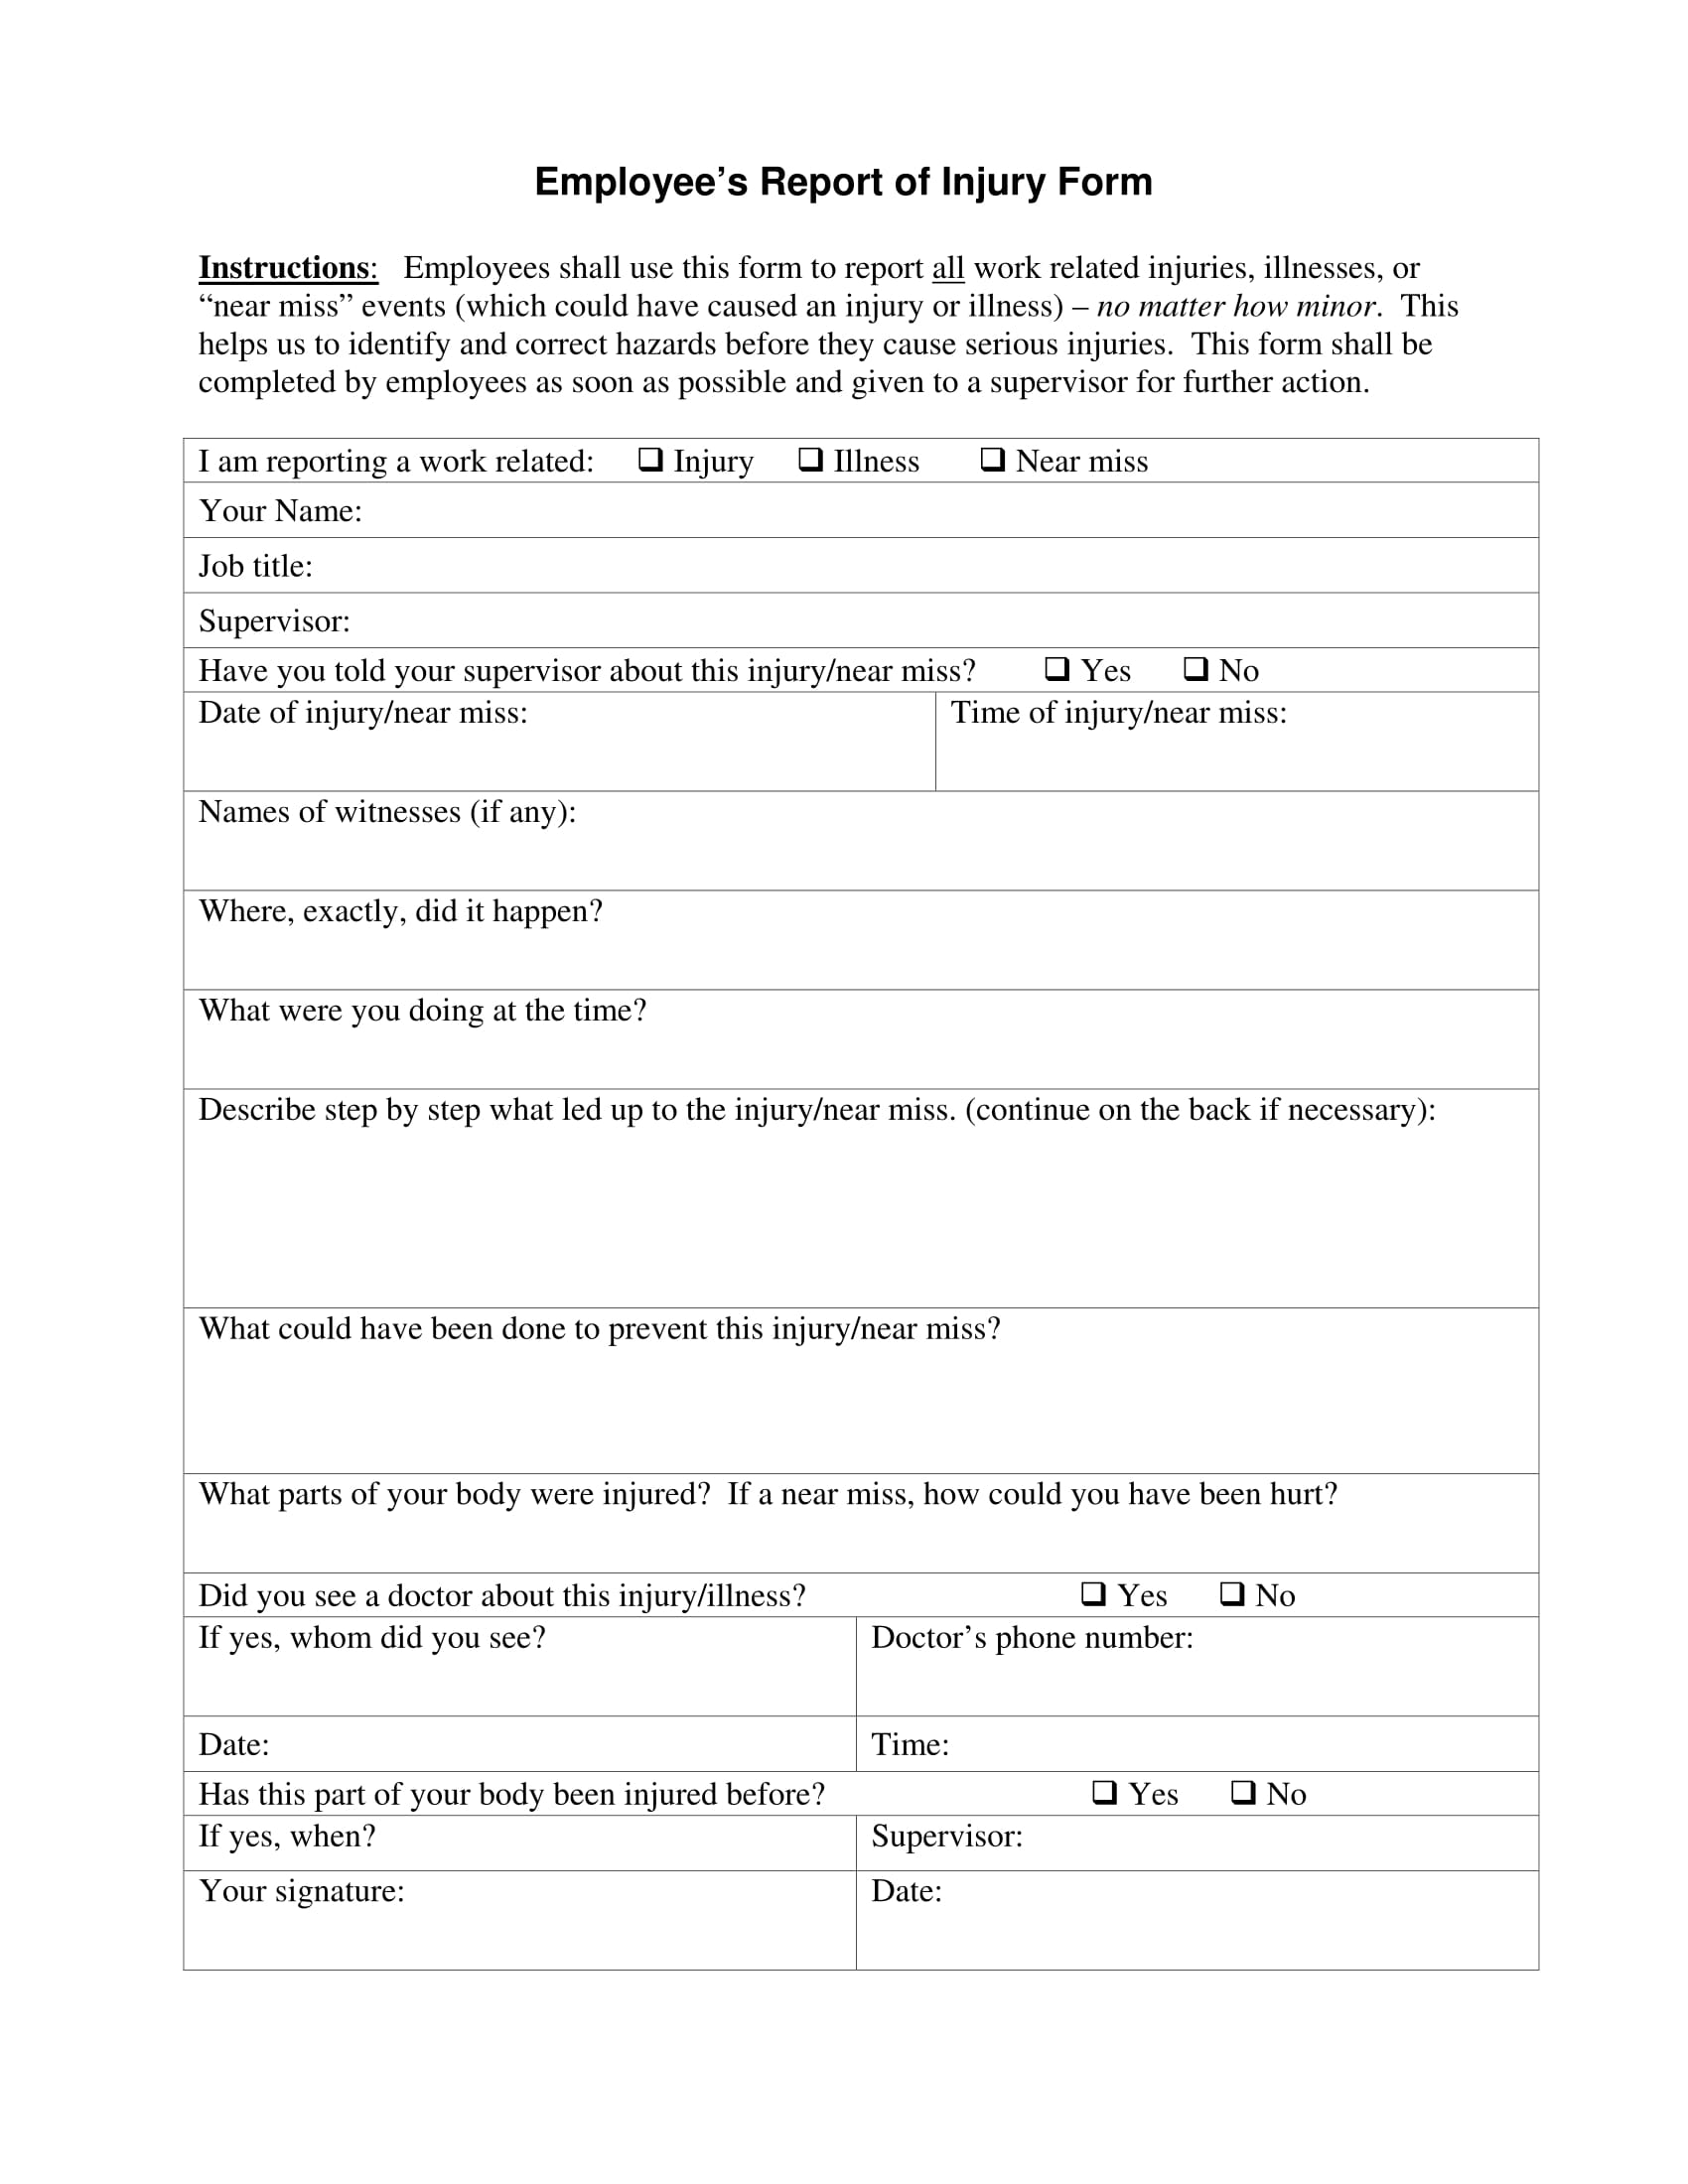 employee’s report of injury form 1